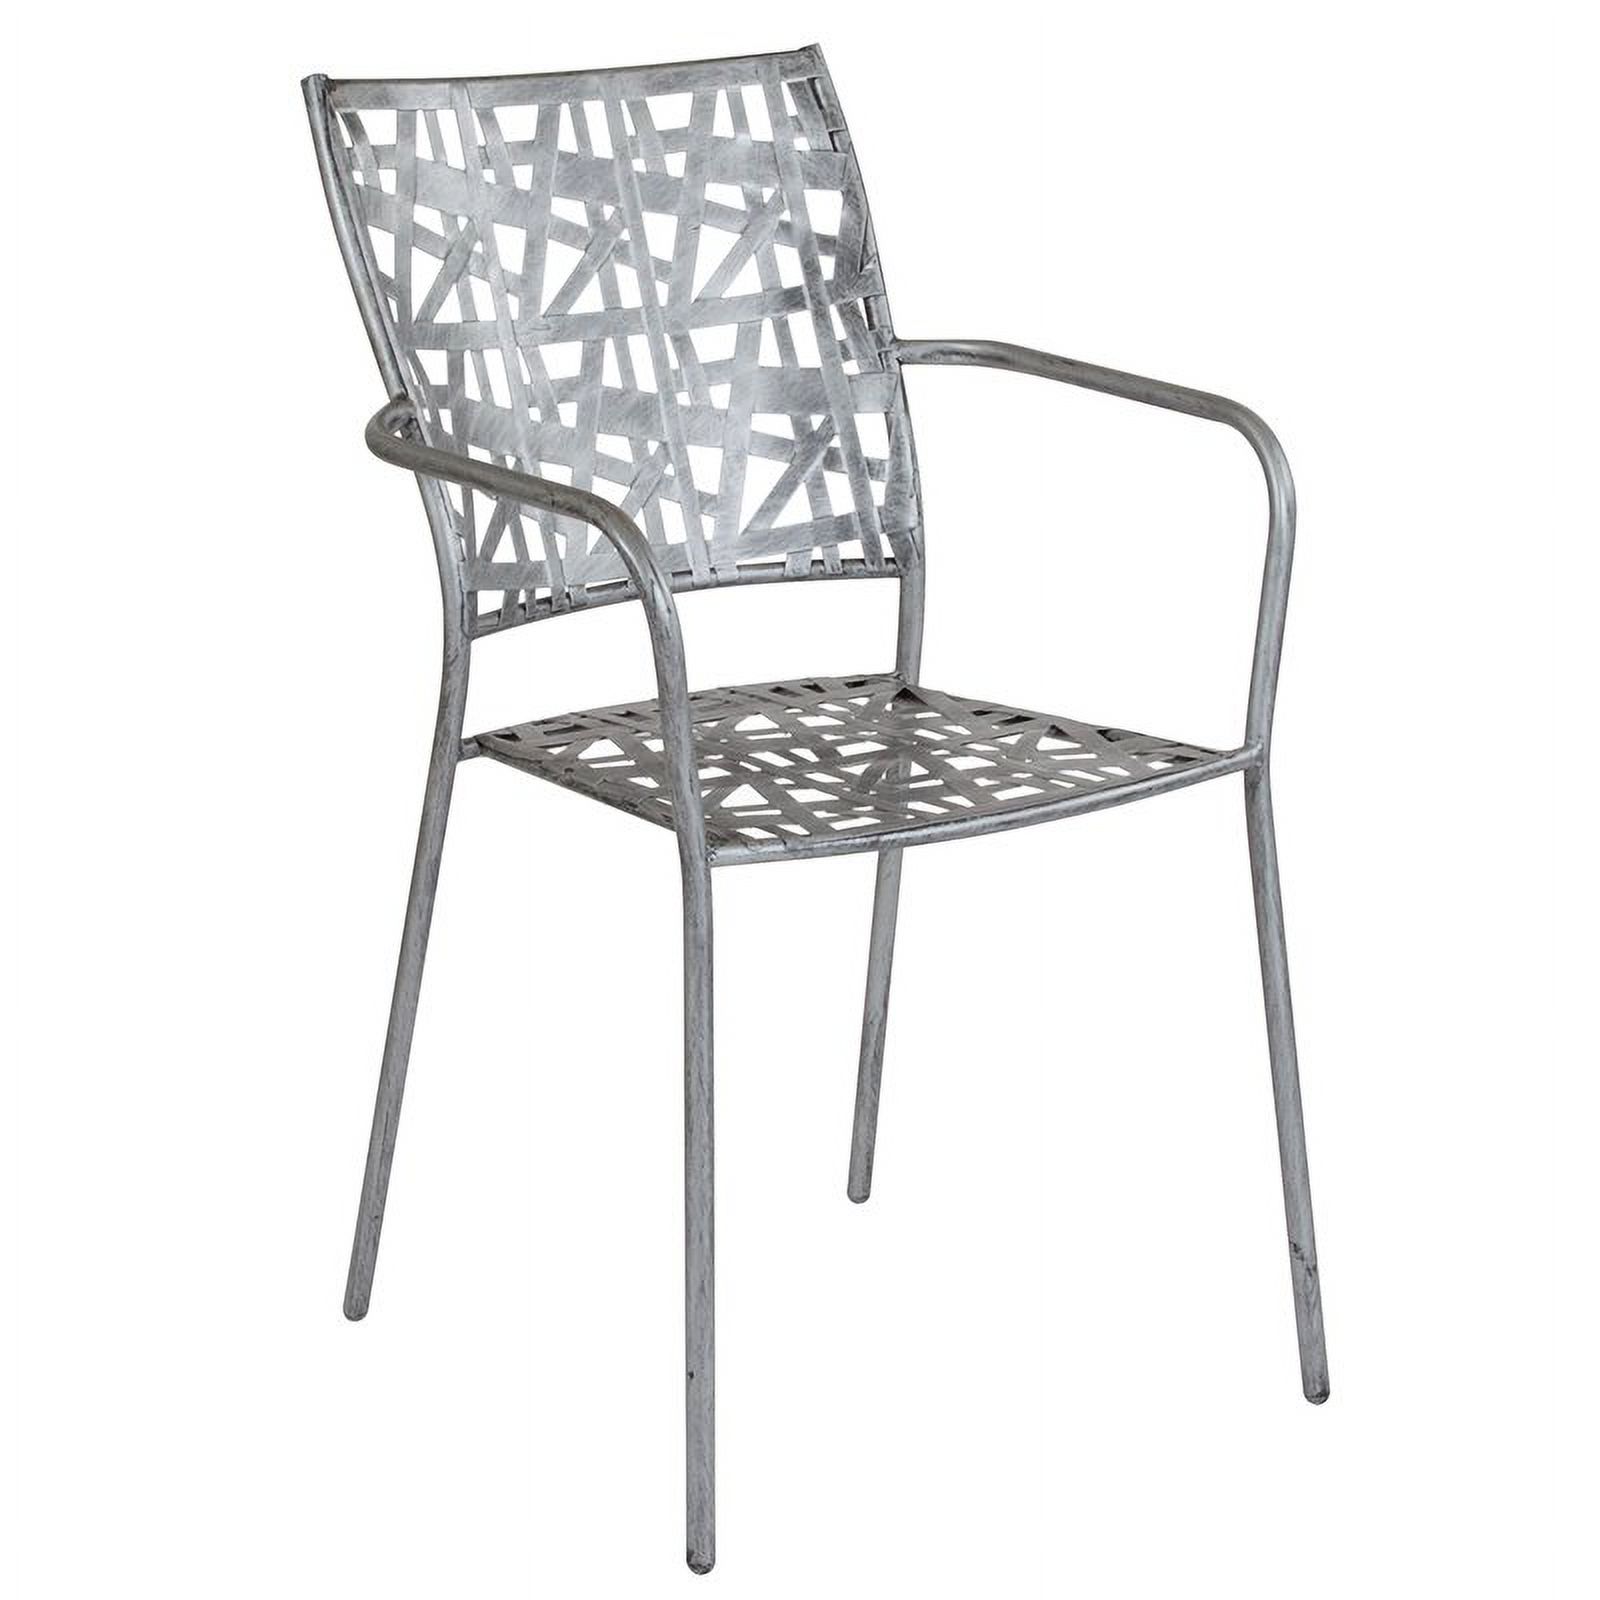 Flash Furniture Agostina Series 31.5" Square Antique Silver Indoor-Outdoor Steel Patio Table with 2 Stack Chairs - image 4 of 4